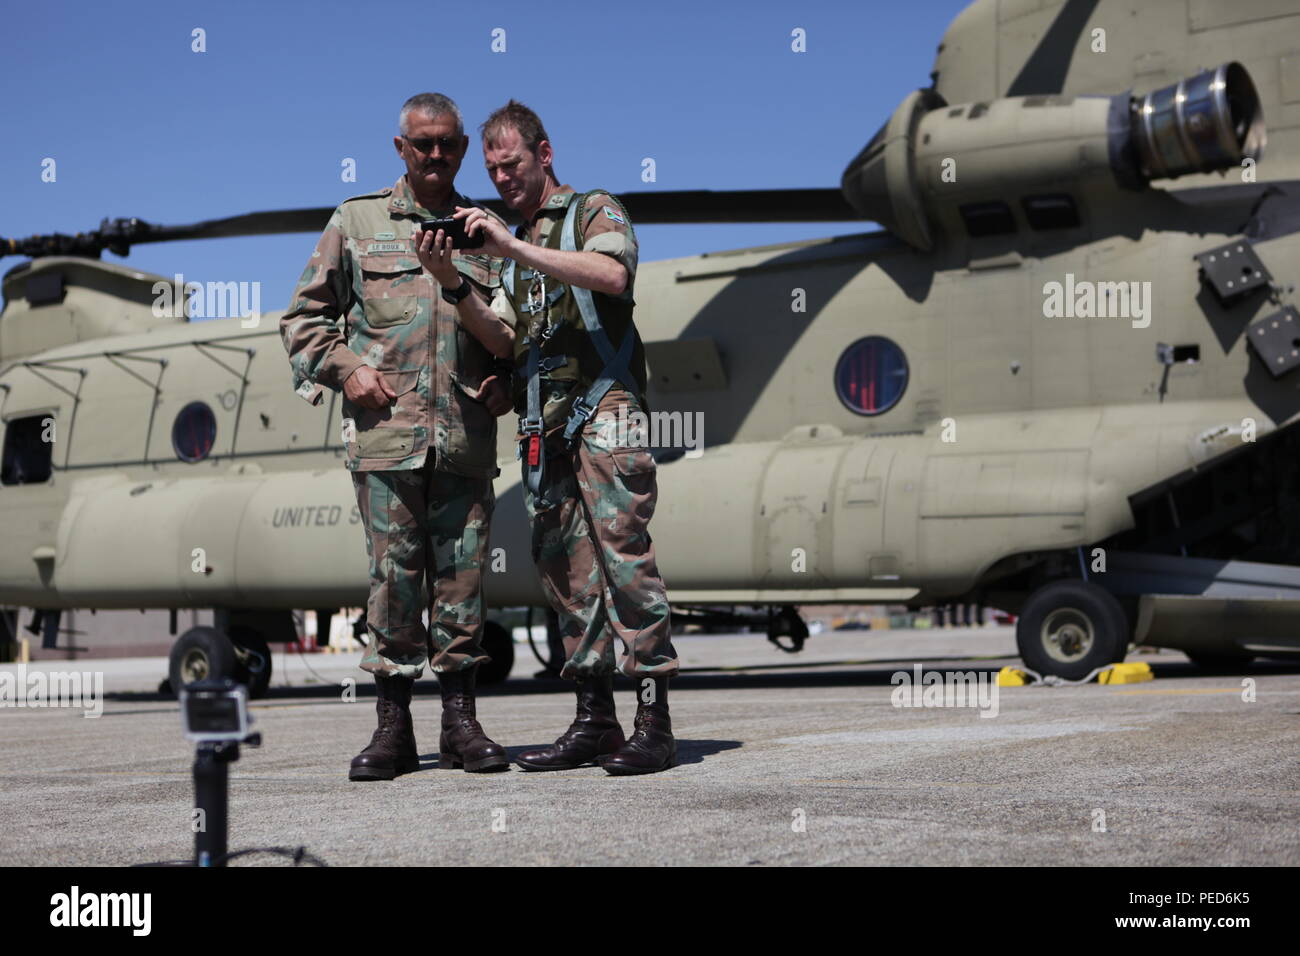 South African Lt. Cols. Laurel Thatcher and Skillie Le Roux look at images on a cell phone at Quanset Air National Guard Base while refueling a U.S. Army CH-47 Chinook for the international wing exchange jump, Aug. 3, 2015.  Leapfest is an International parachute competition hosted by the 56th Troop Command, Rhode Island National Guard to promote high level technical training and esprit de corps within the International Airborne community. (U.S. Army Photo by Sgt. 1st Class Horace Murray/Released) Stock Photo